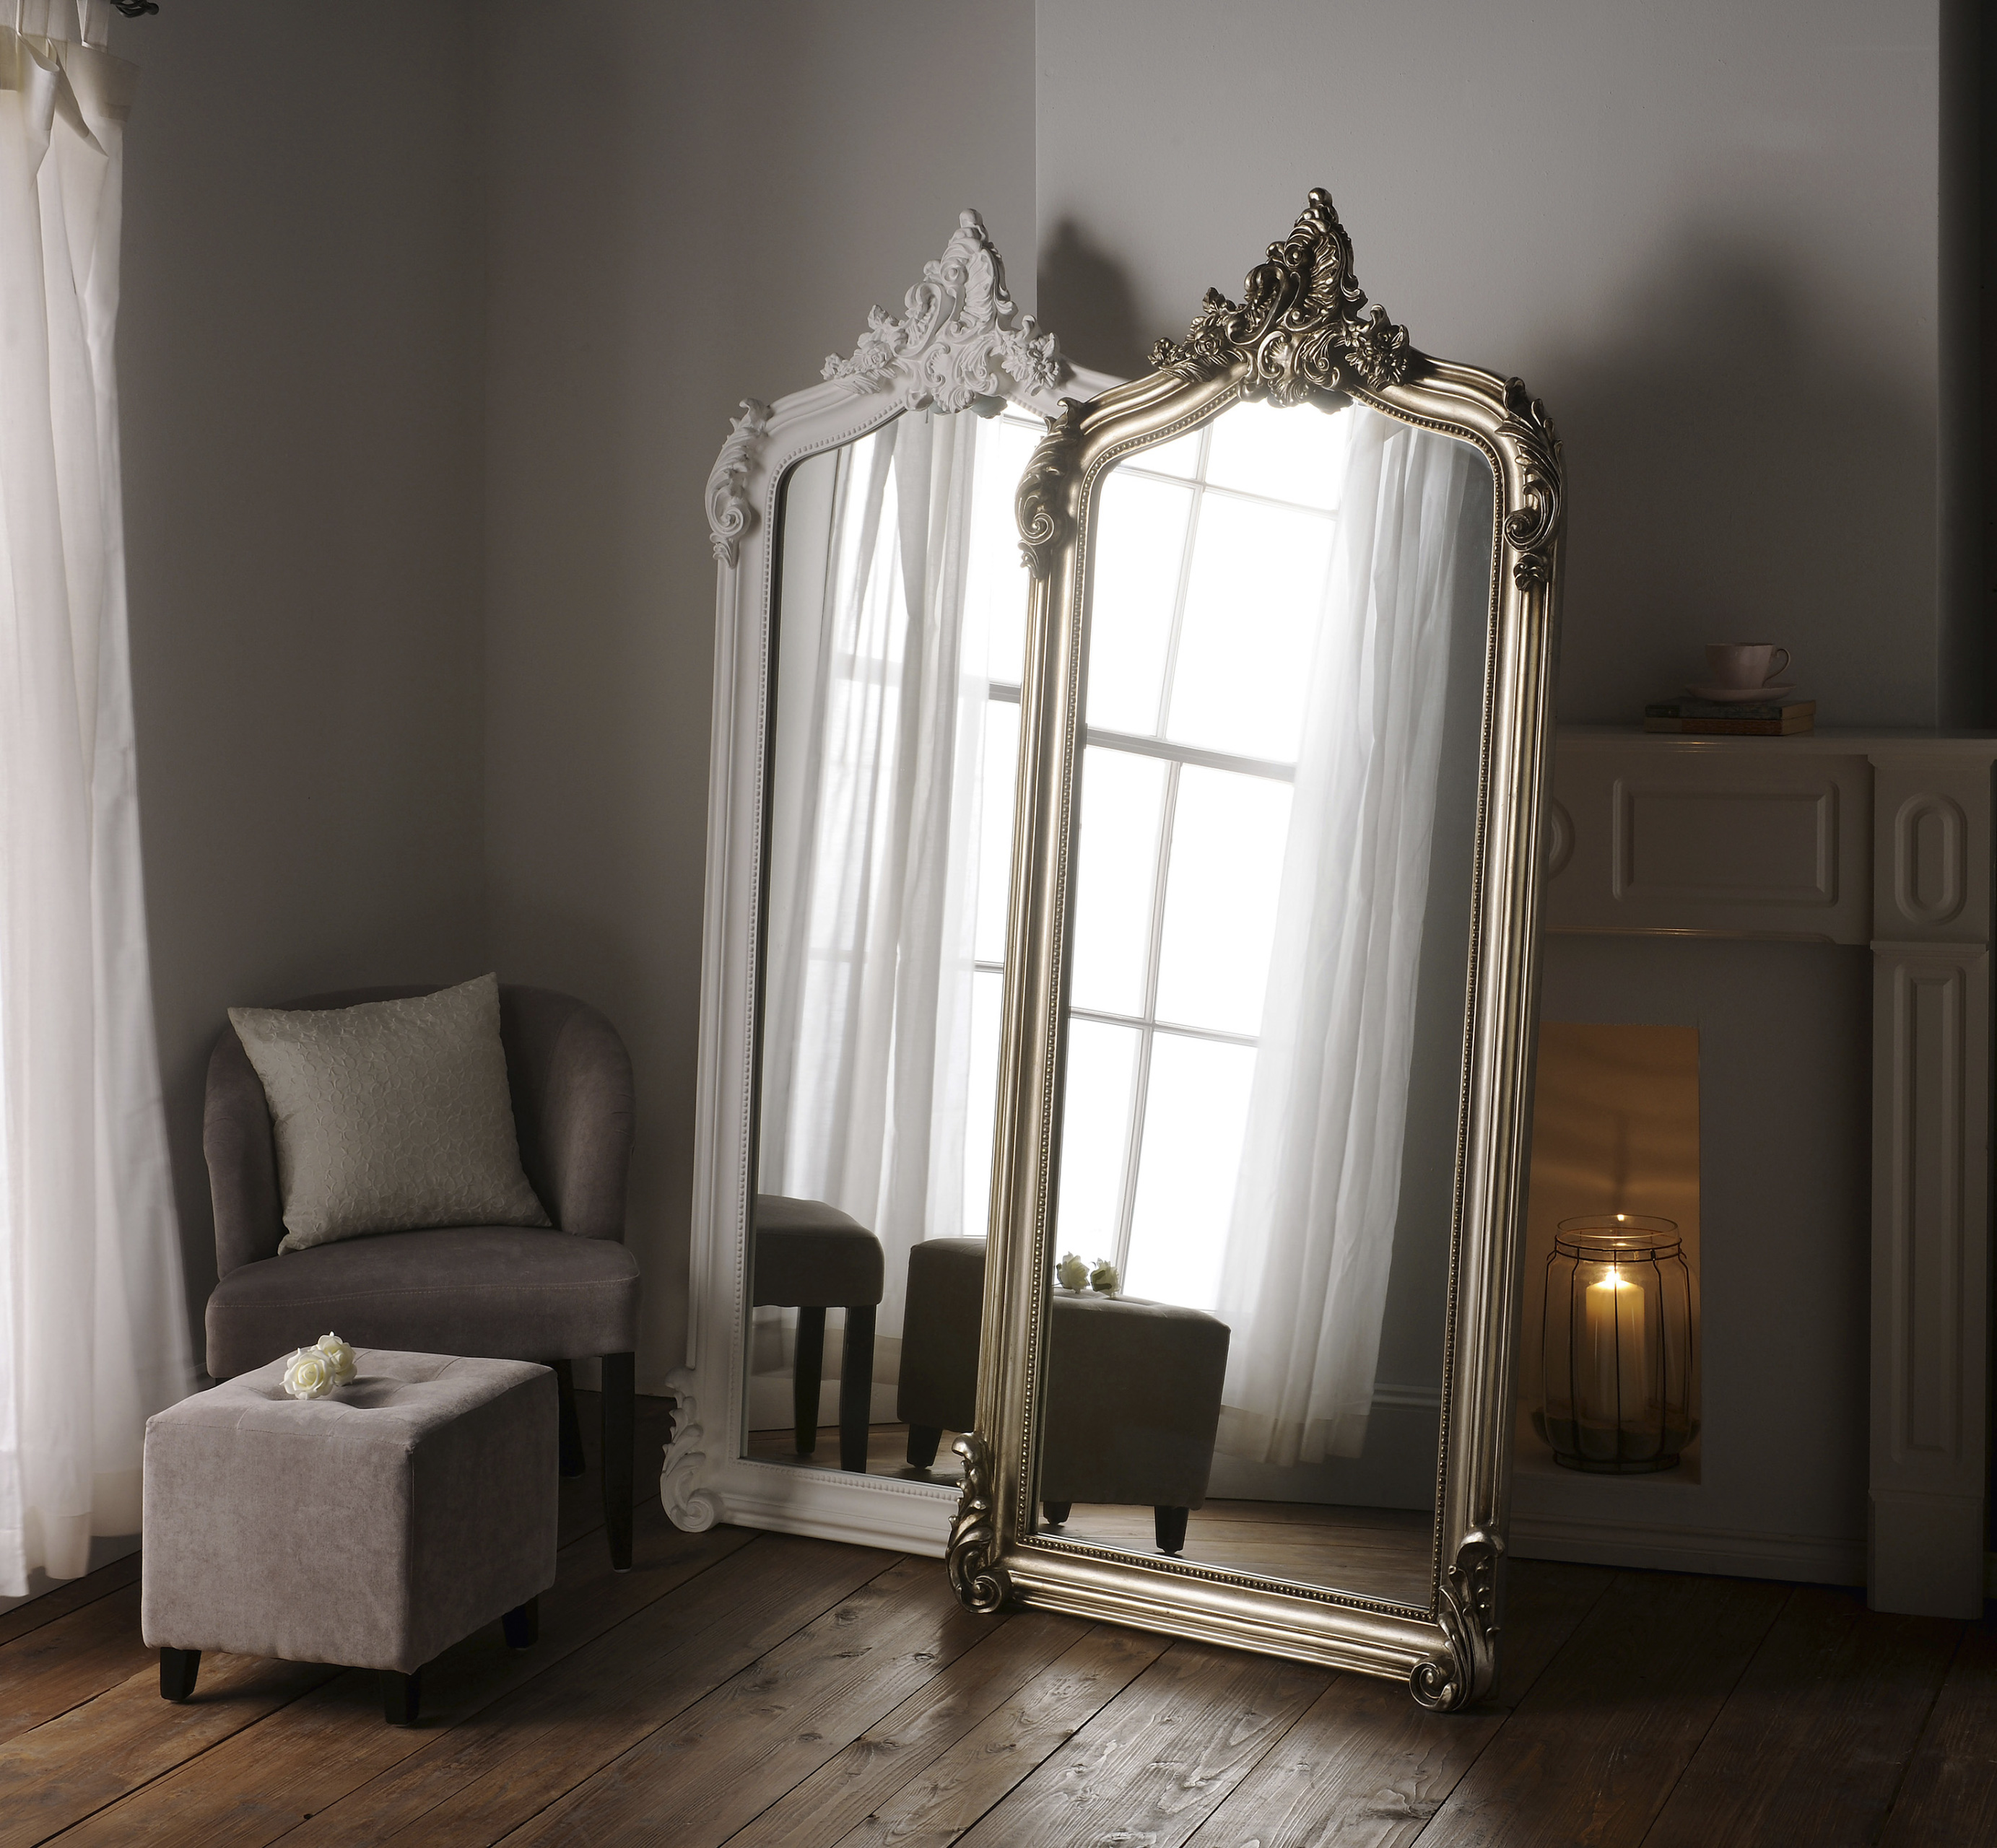 YG136 WHITE LEANER MIRROR FULL LENGTH MIRROR WITH ARCHED TOP